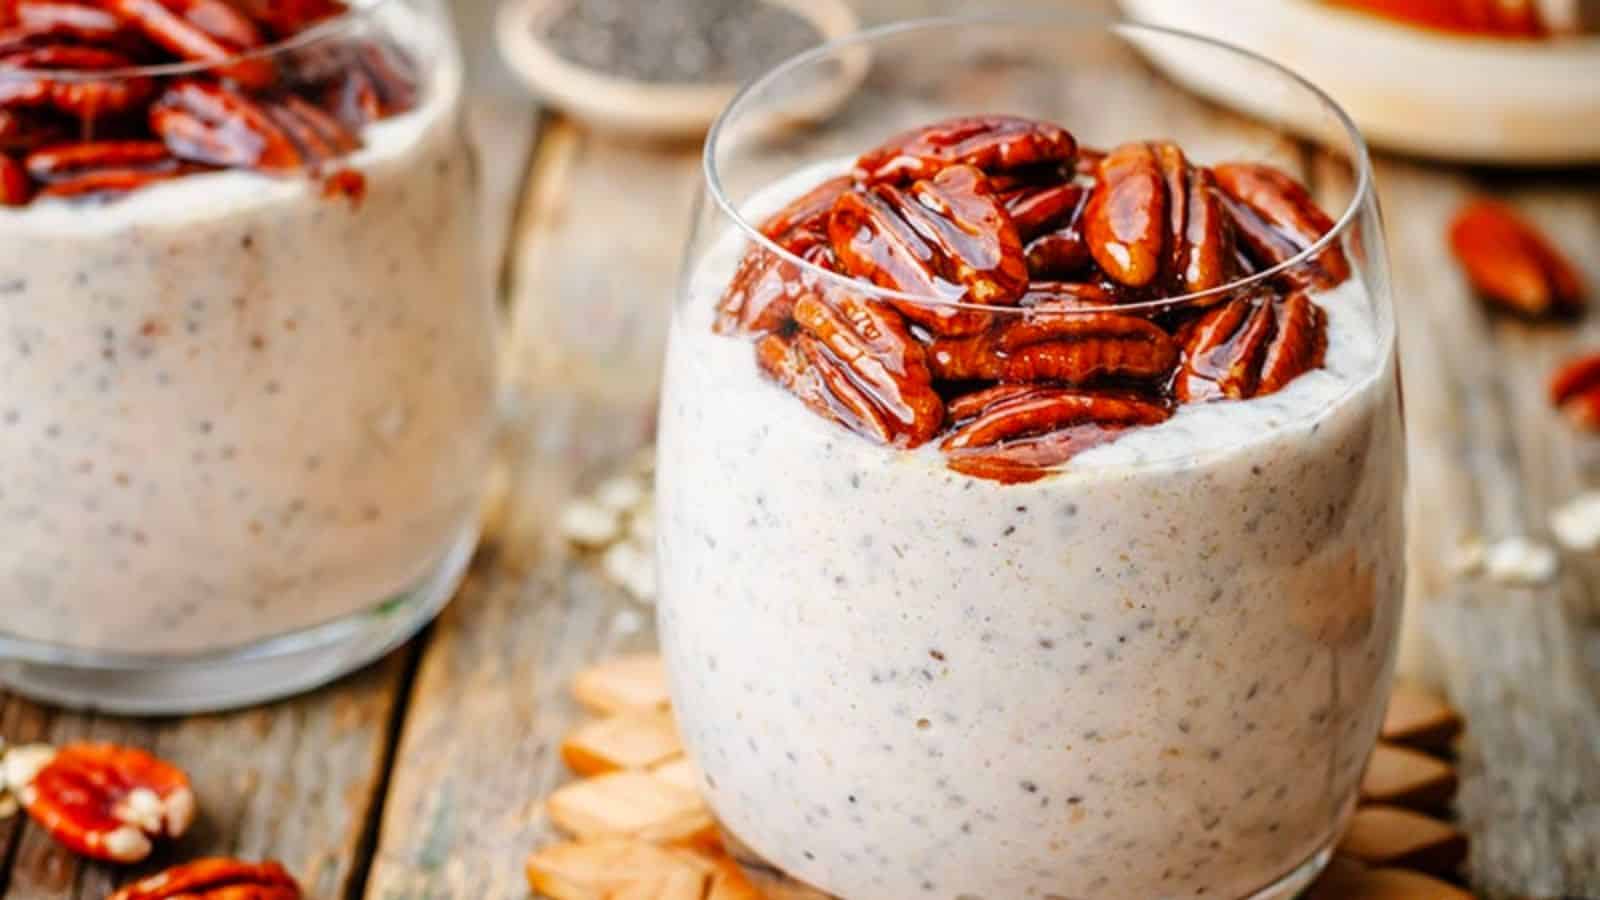 <p>Who knew chia could be so satisfying? This chai latte chia pudding is an exotic, low-carb way to start your day. Think of it as your breakfast cup of tea, without the hunger.<br><strong>Get the Recipe: </strong><a href="https://www.primaledgehealth.com/chai-latte-chia-pudding/?utm_source=msn&utm_medium=page&utm_campaign=msn">Chai Latte Chia Pudding</a></p>